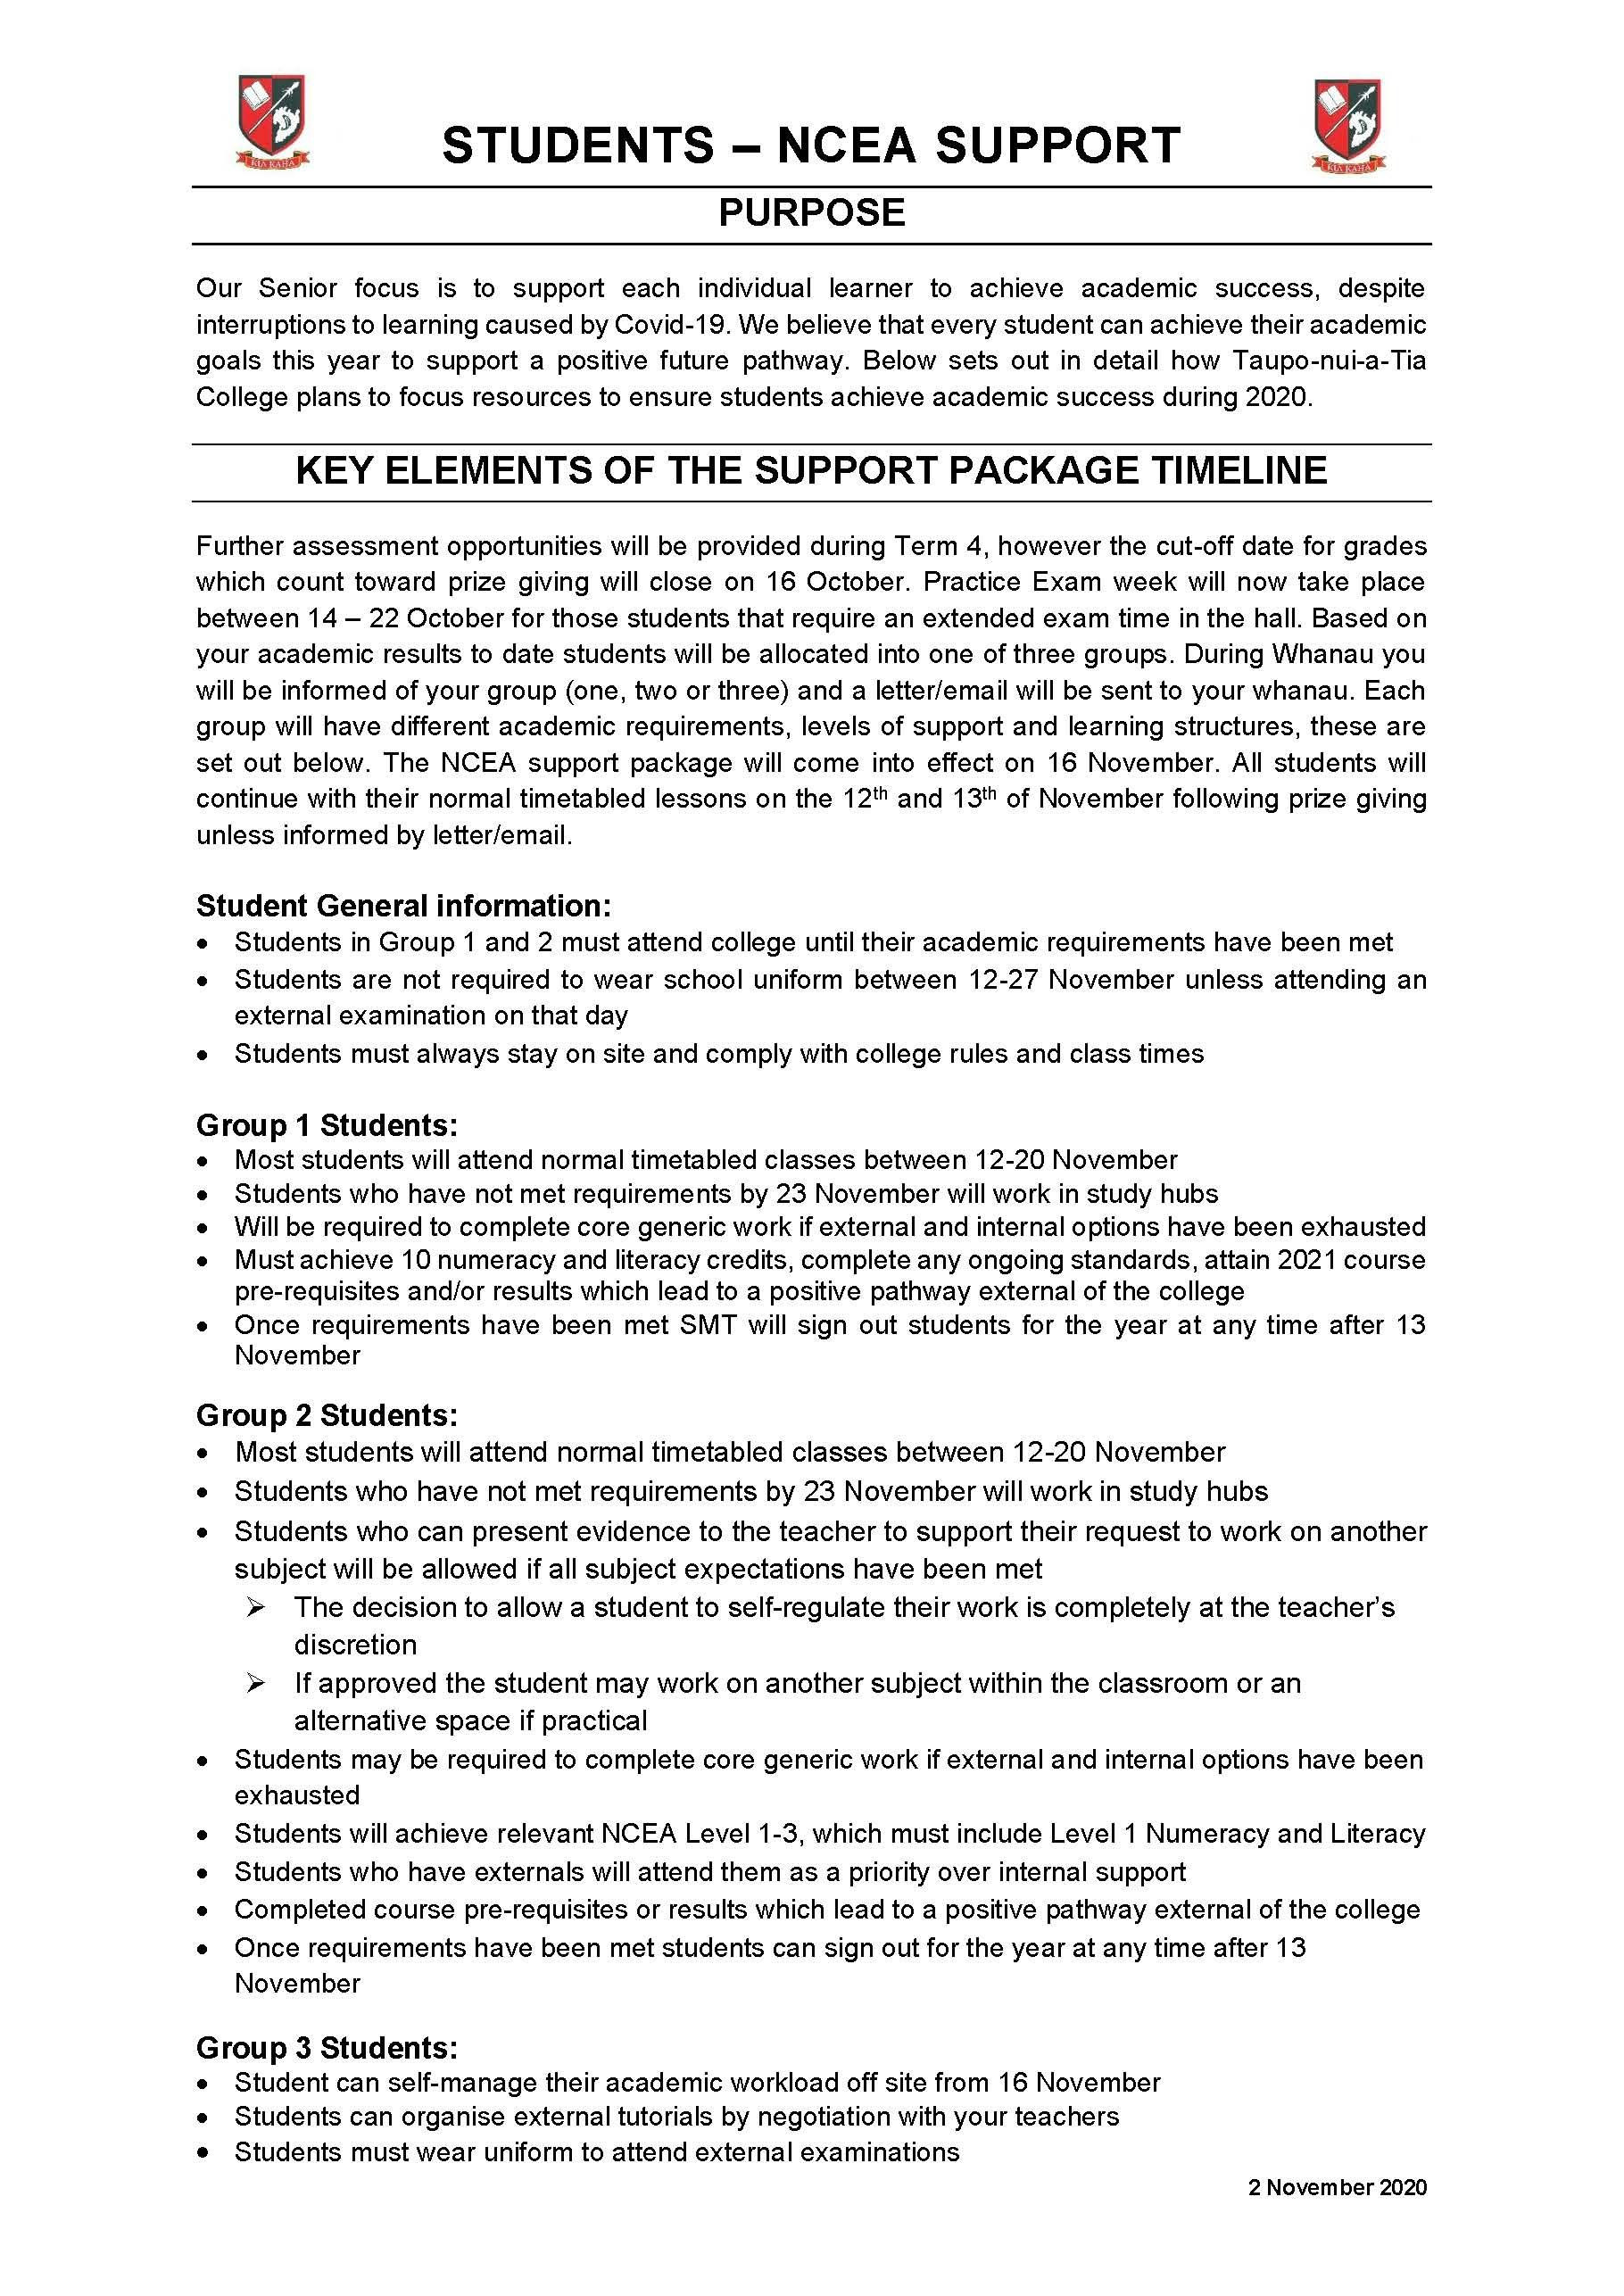 Ncea Support Package   Version 2